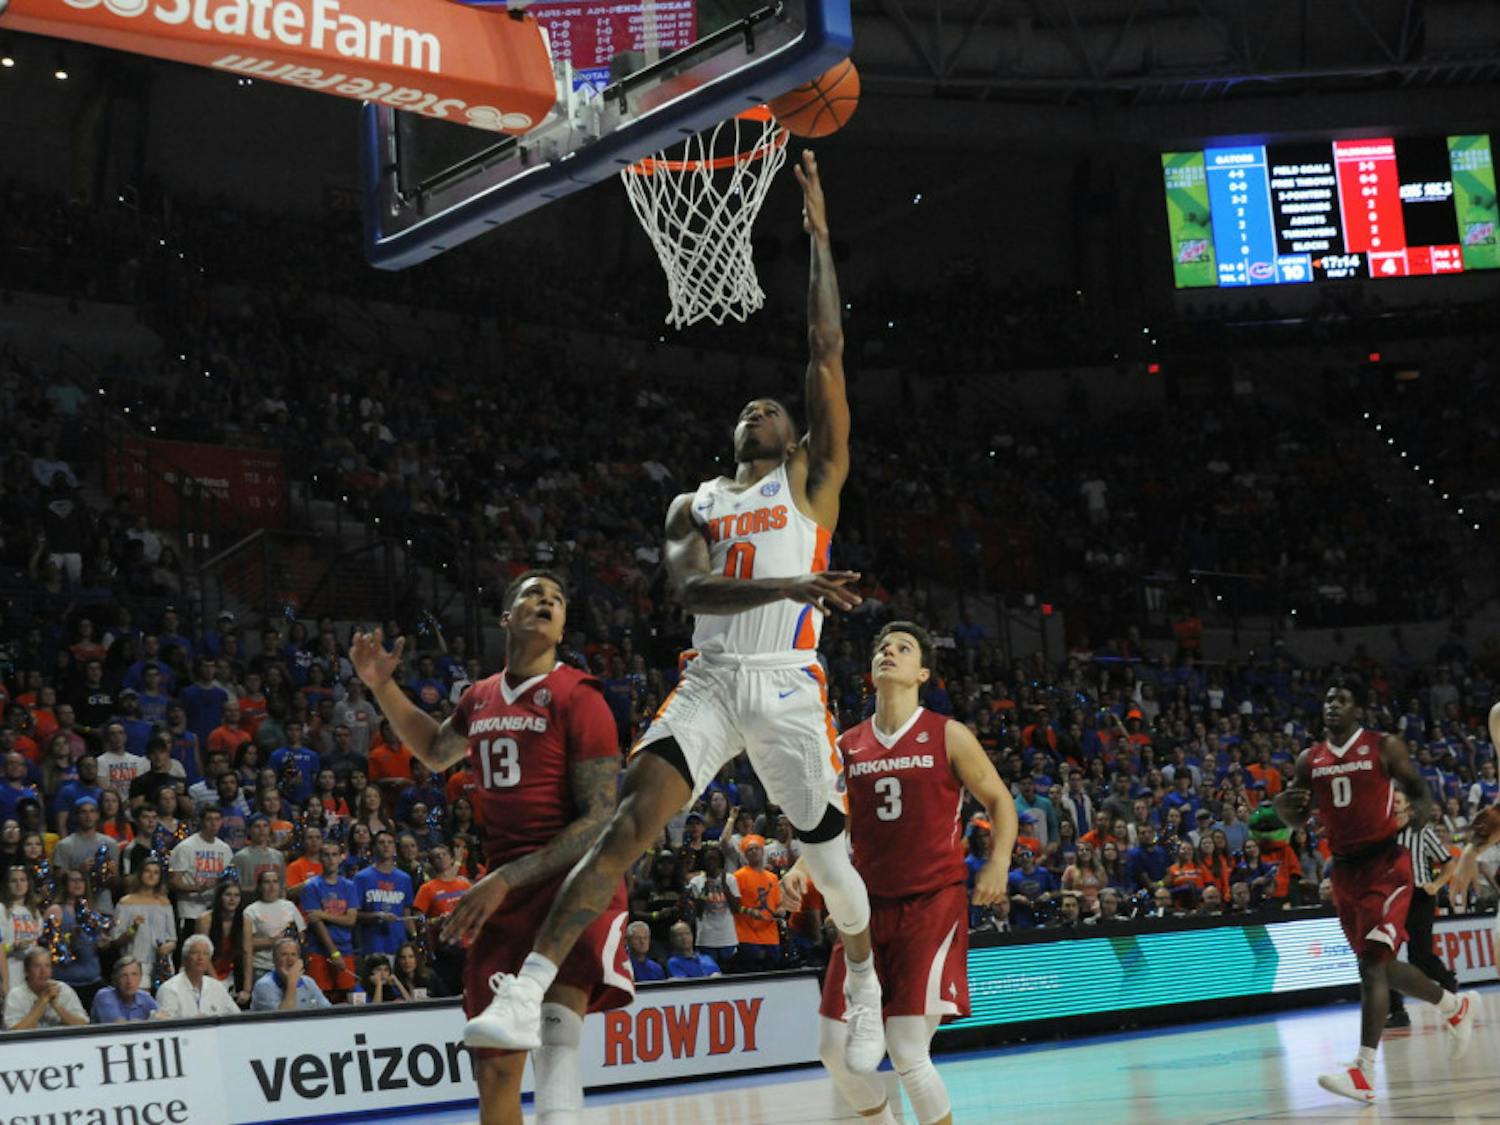 UF guard Kasey Hill attempts a layup in Florida's 78-65 win over Arkansas on Wednesday at the O'Connell Center.&nbsp;